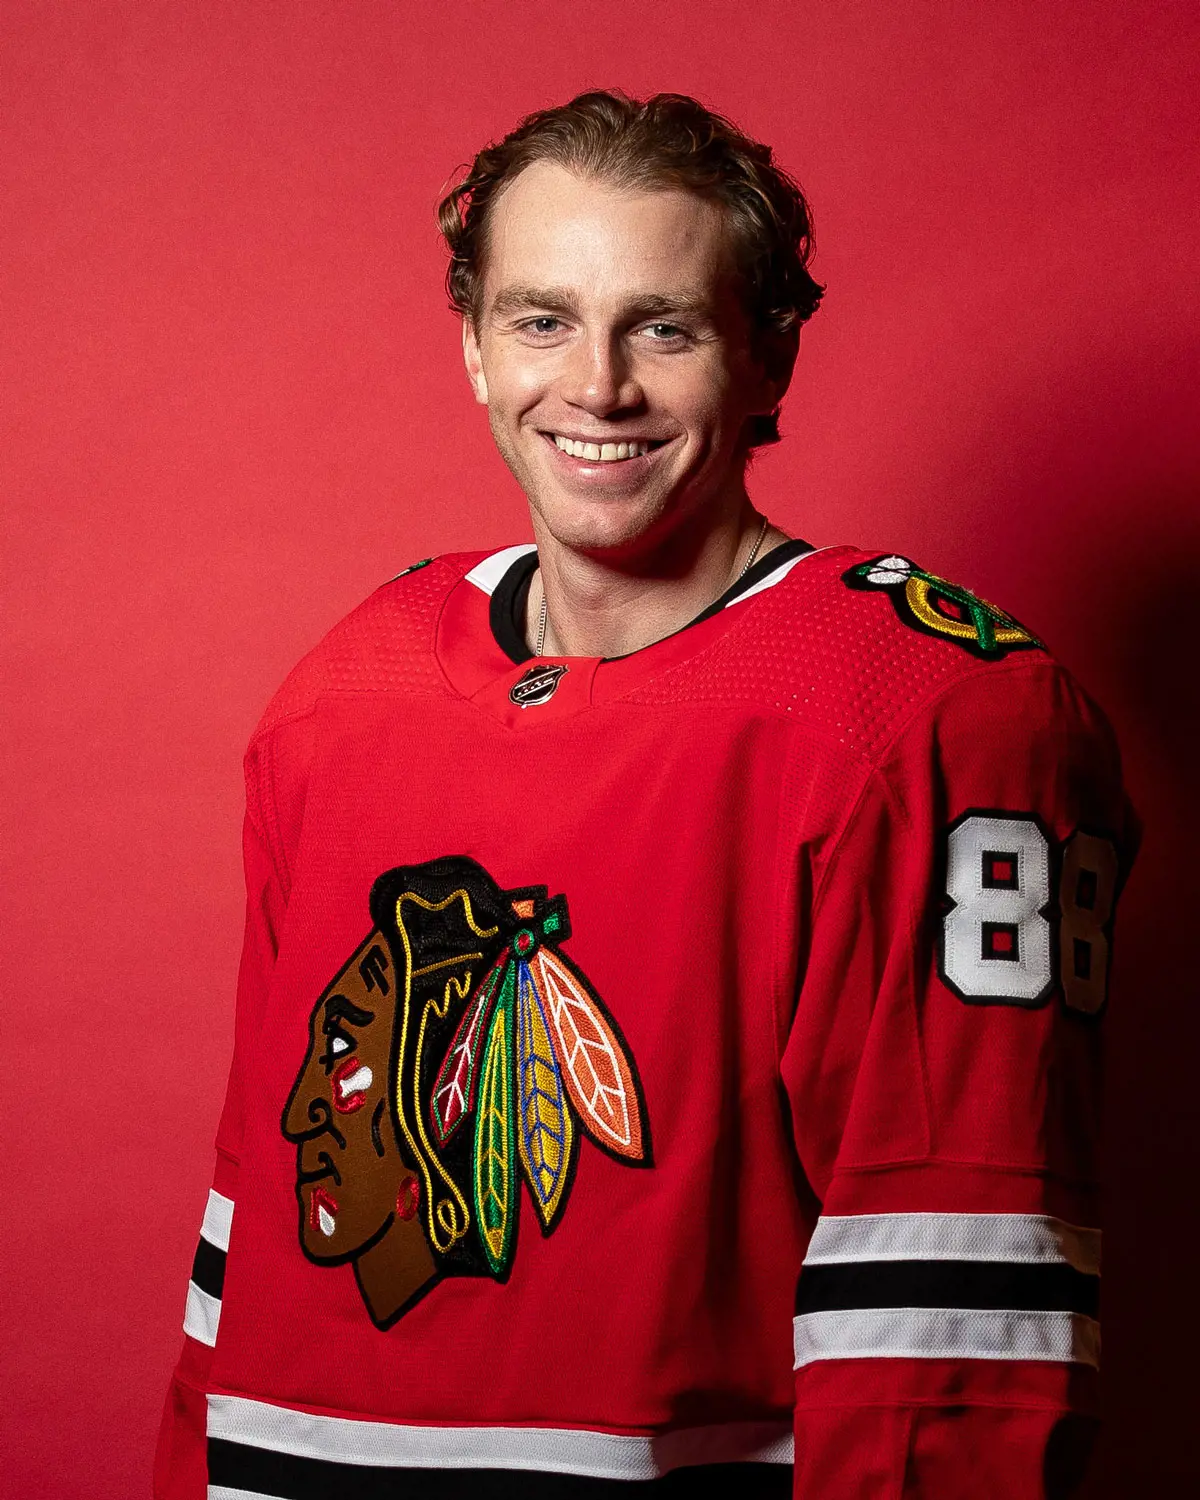 Former alternate captain of the Blackhawks, Kane is traded to the Rangers in exhange for draft picks in 2023 and 2026 NHL entry draft. 